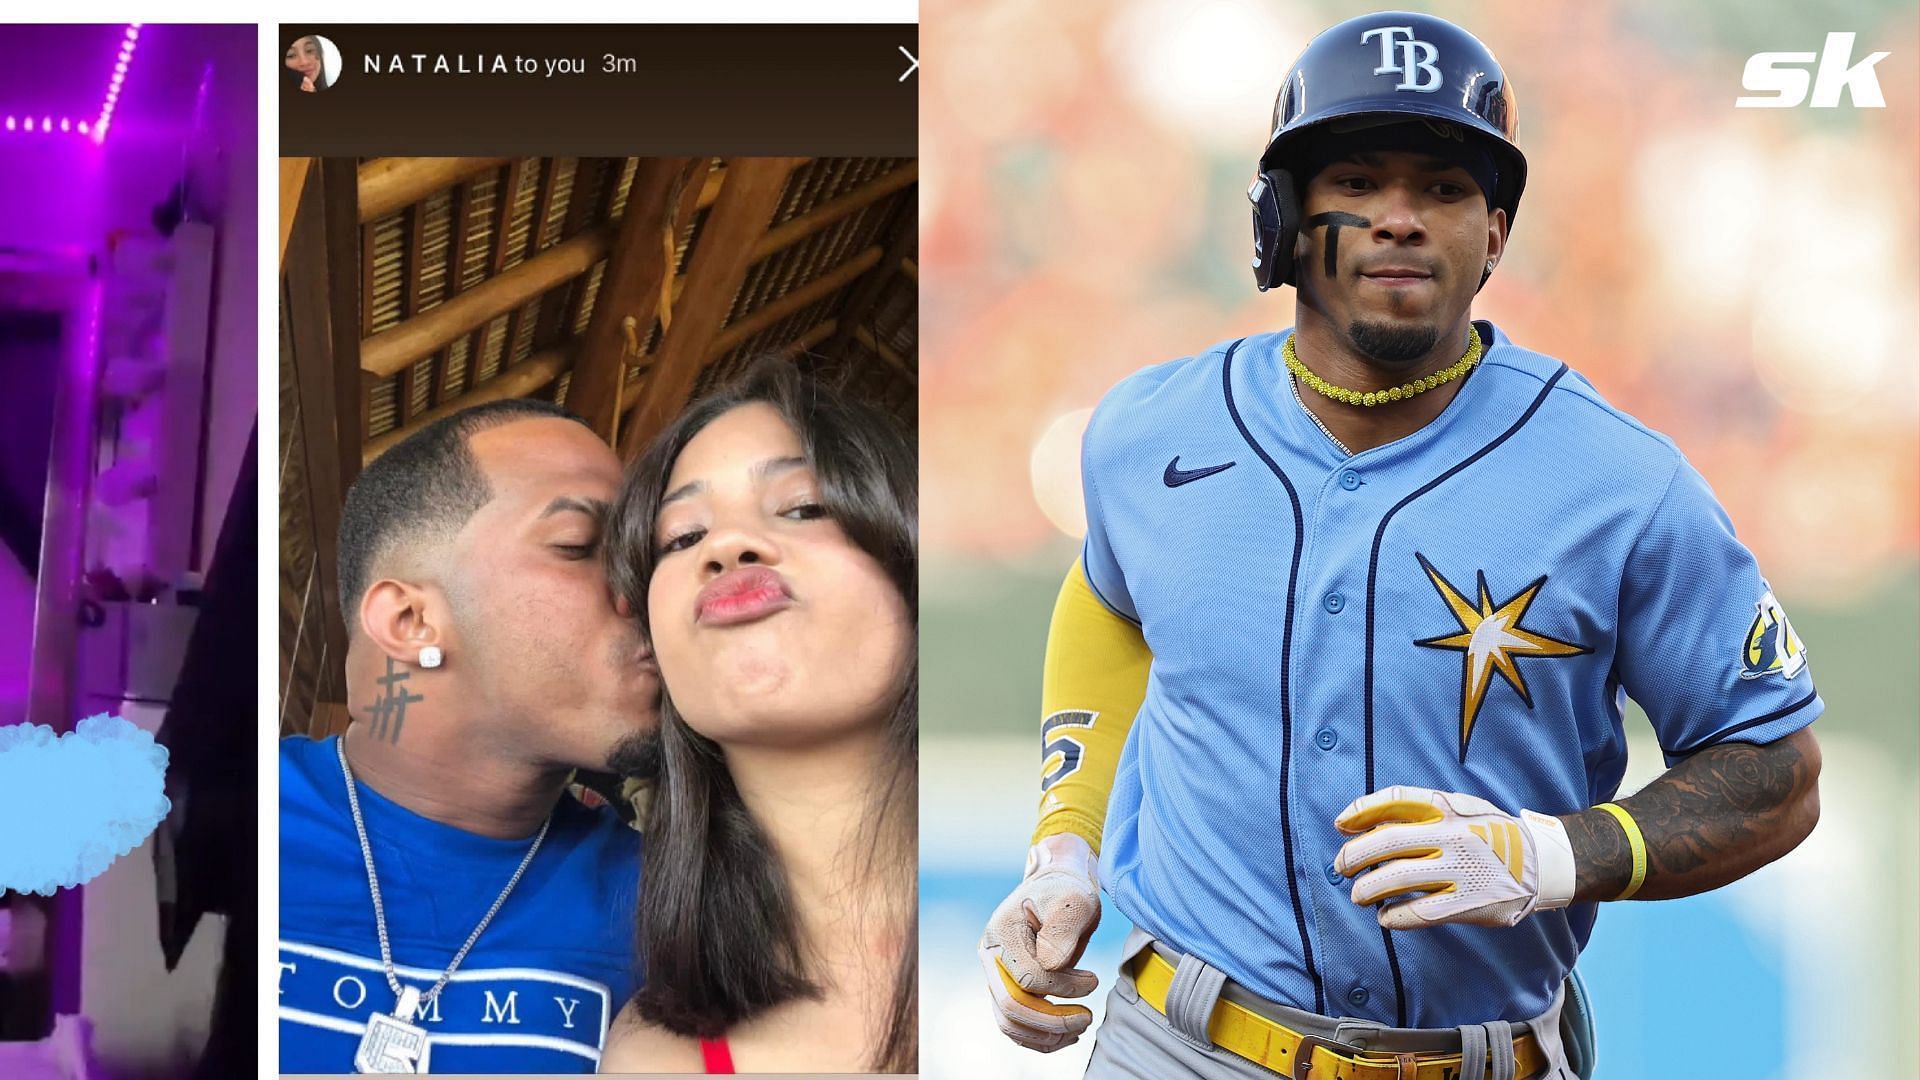 MLB investigating Tampa Bay Rays shortstop Wander Franco after  objectionable social media posts emerge